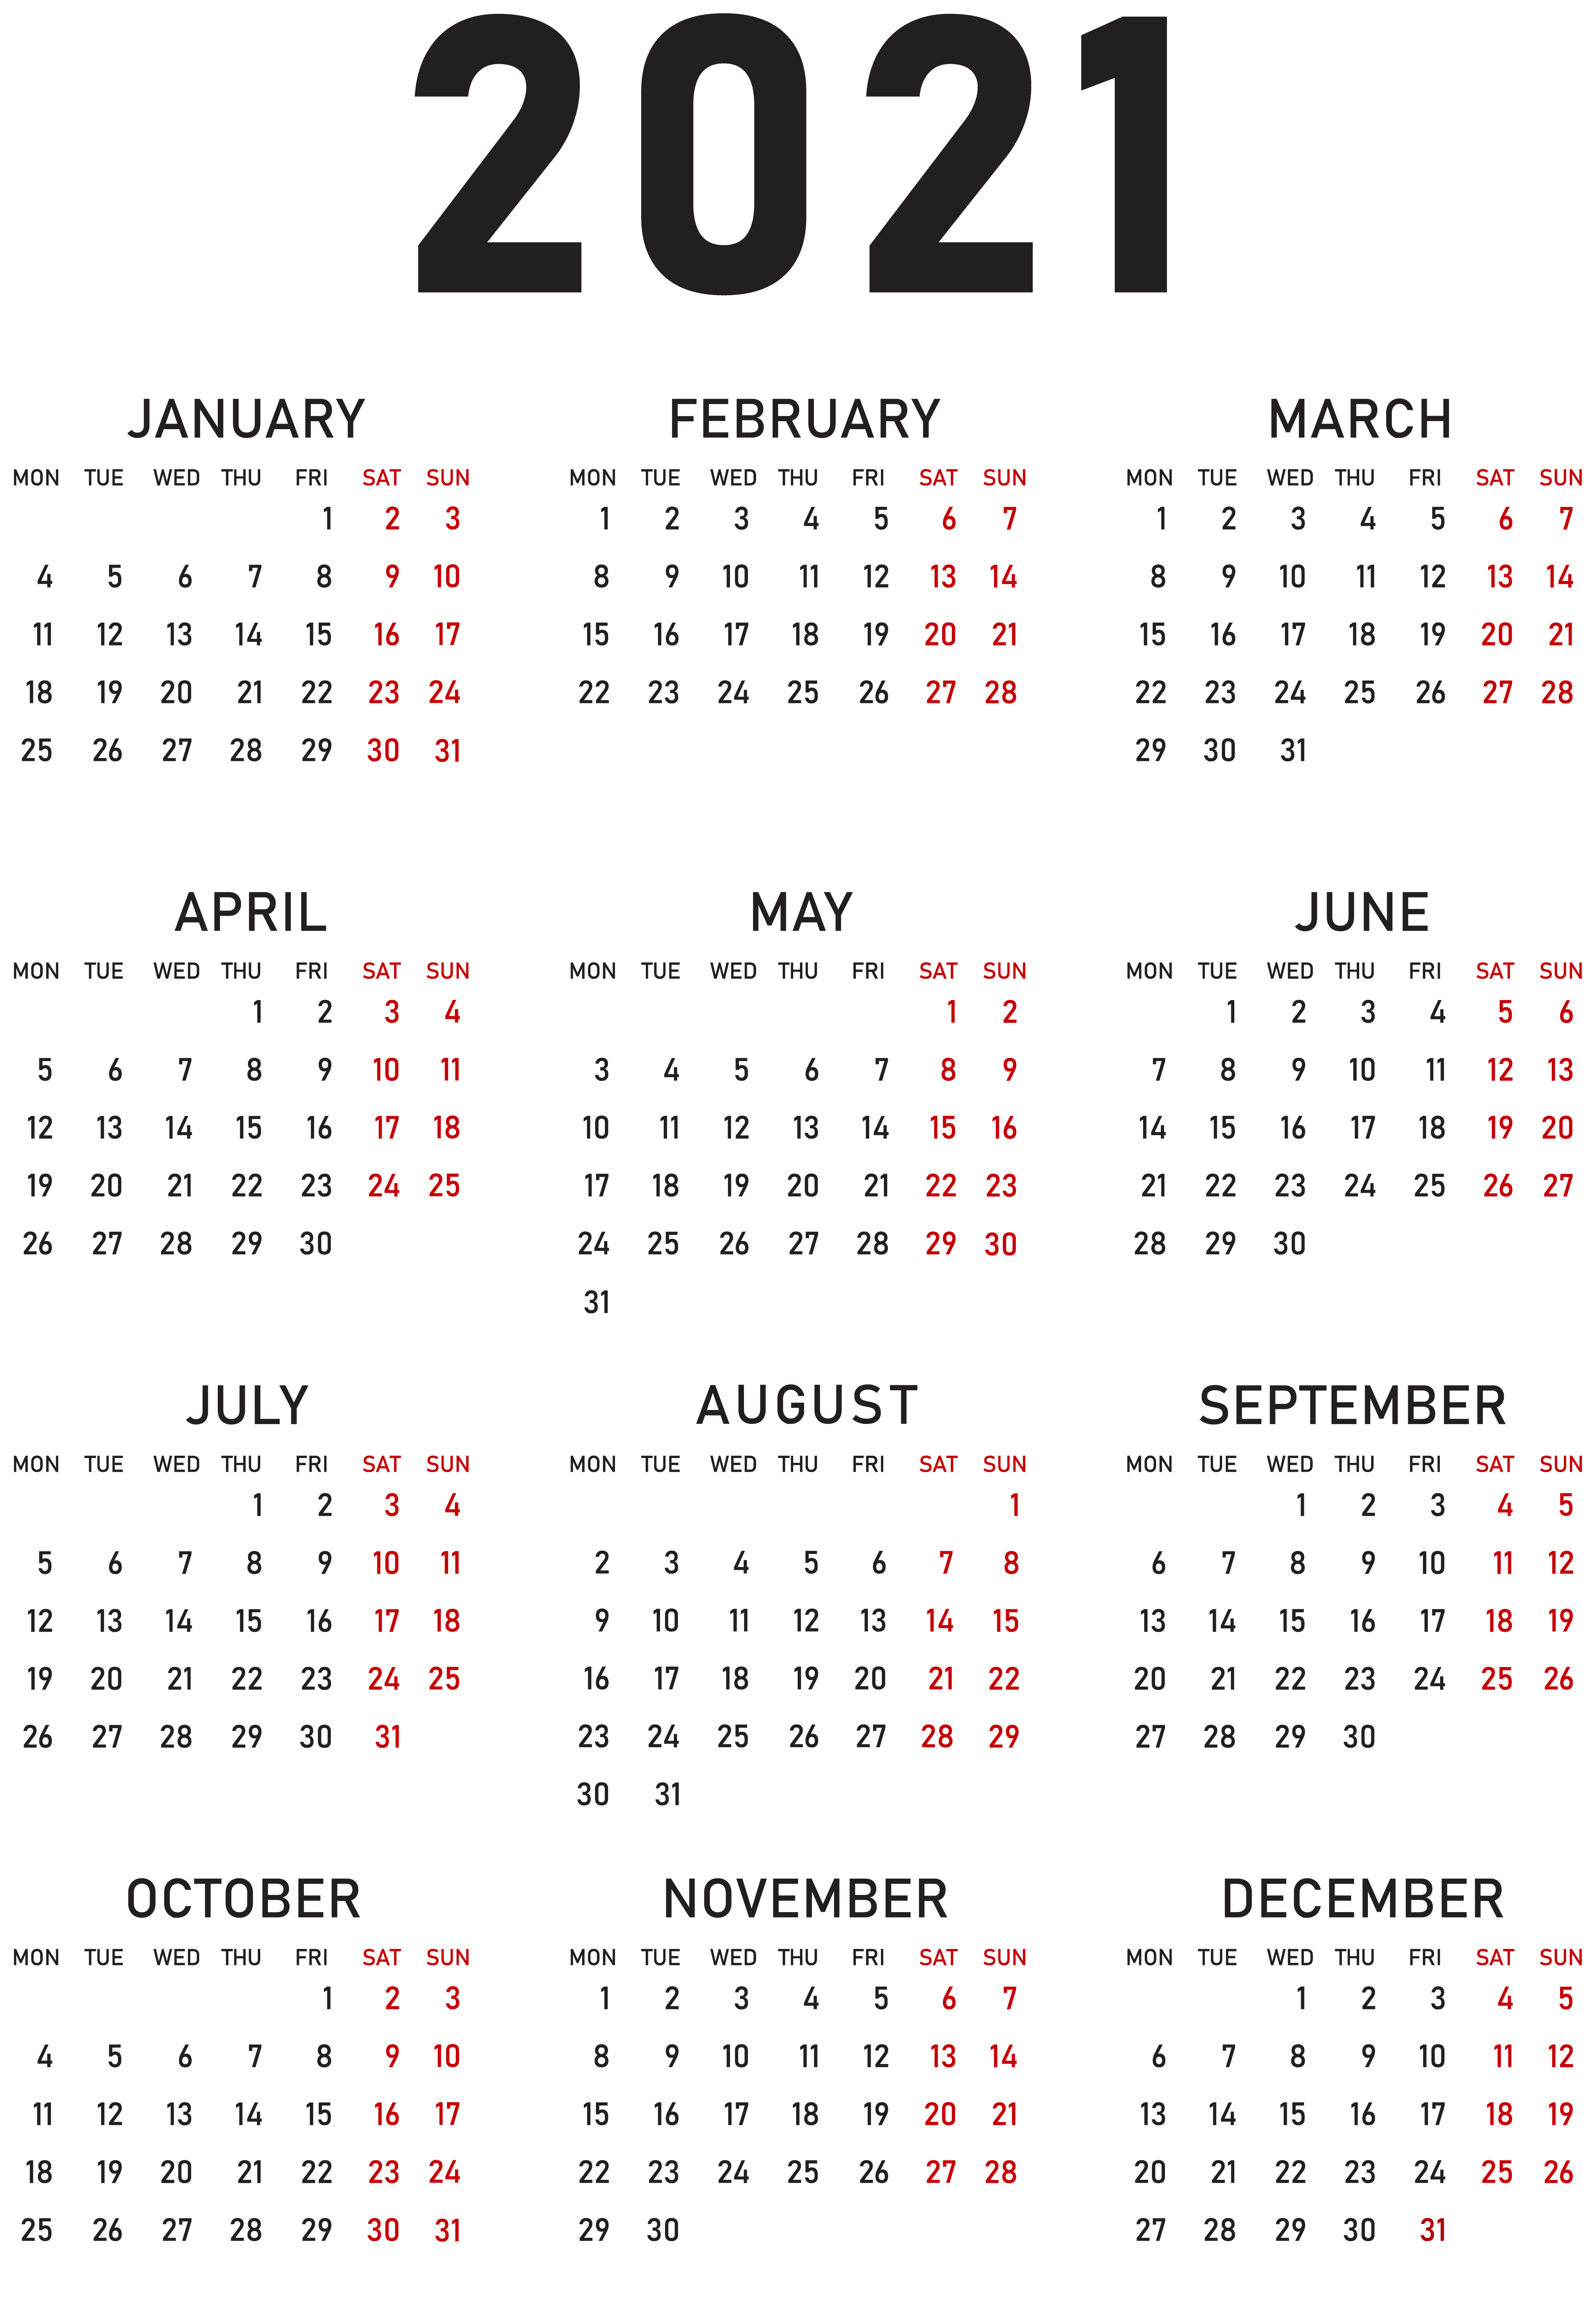 2021 calendar transparent background 2021 Calendar Png Transparent Clipart Gallery Yopriceville High Quality Images And Transparent Png Free Clipart 2021 calendar transparent background